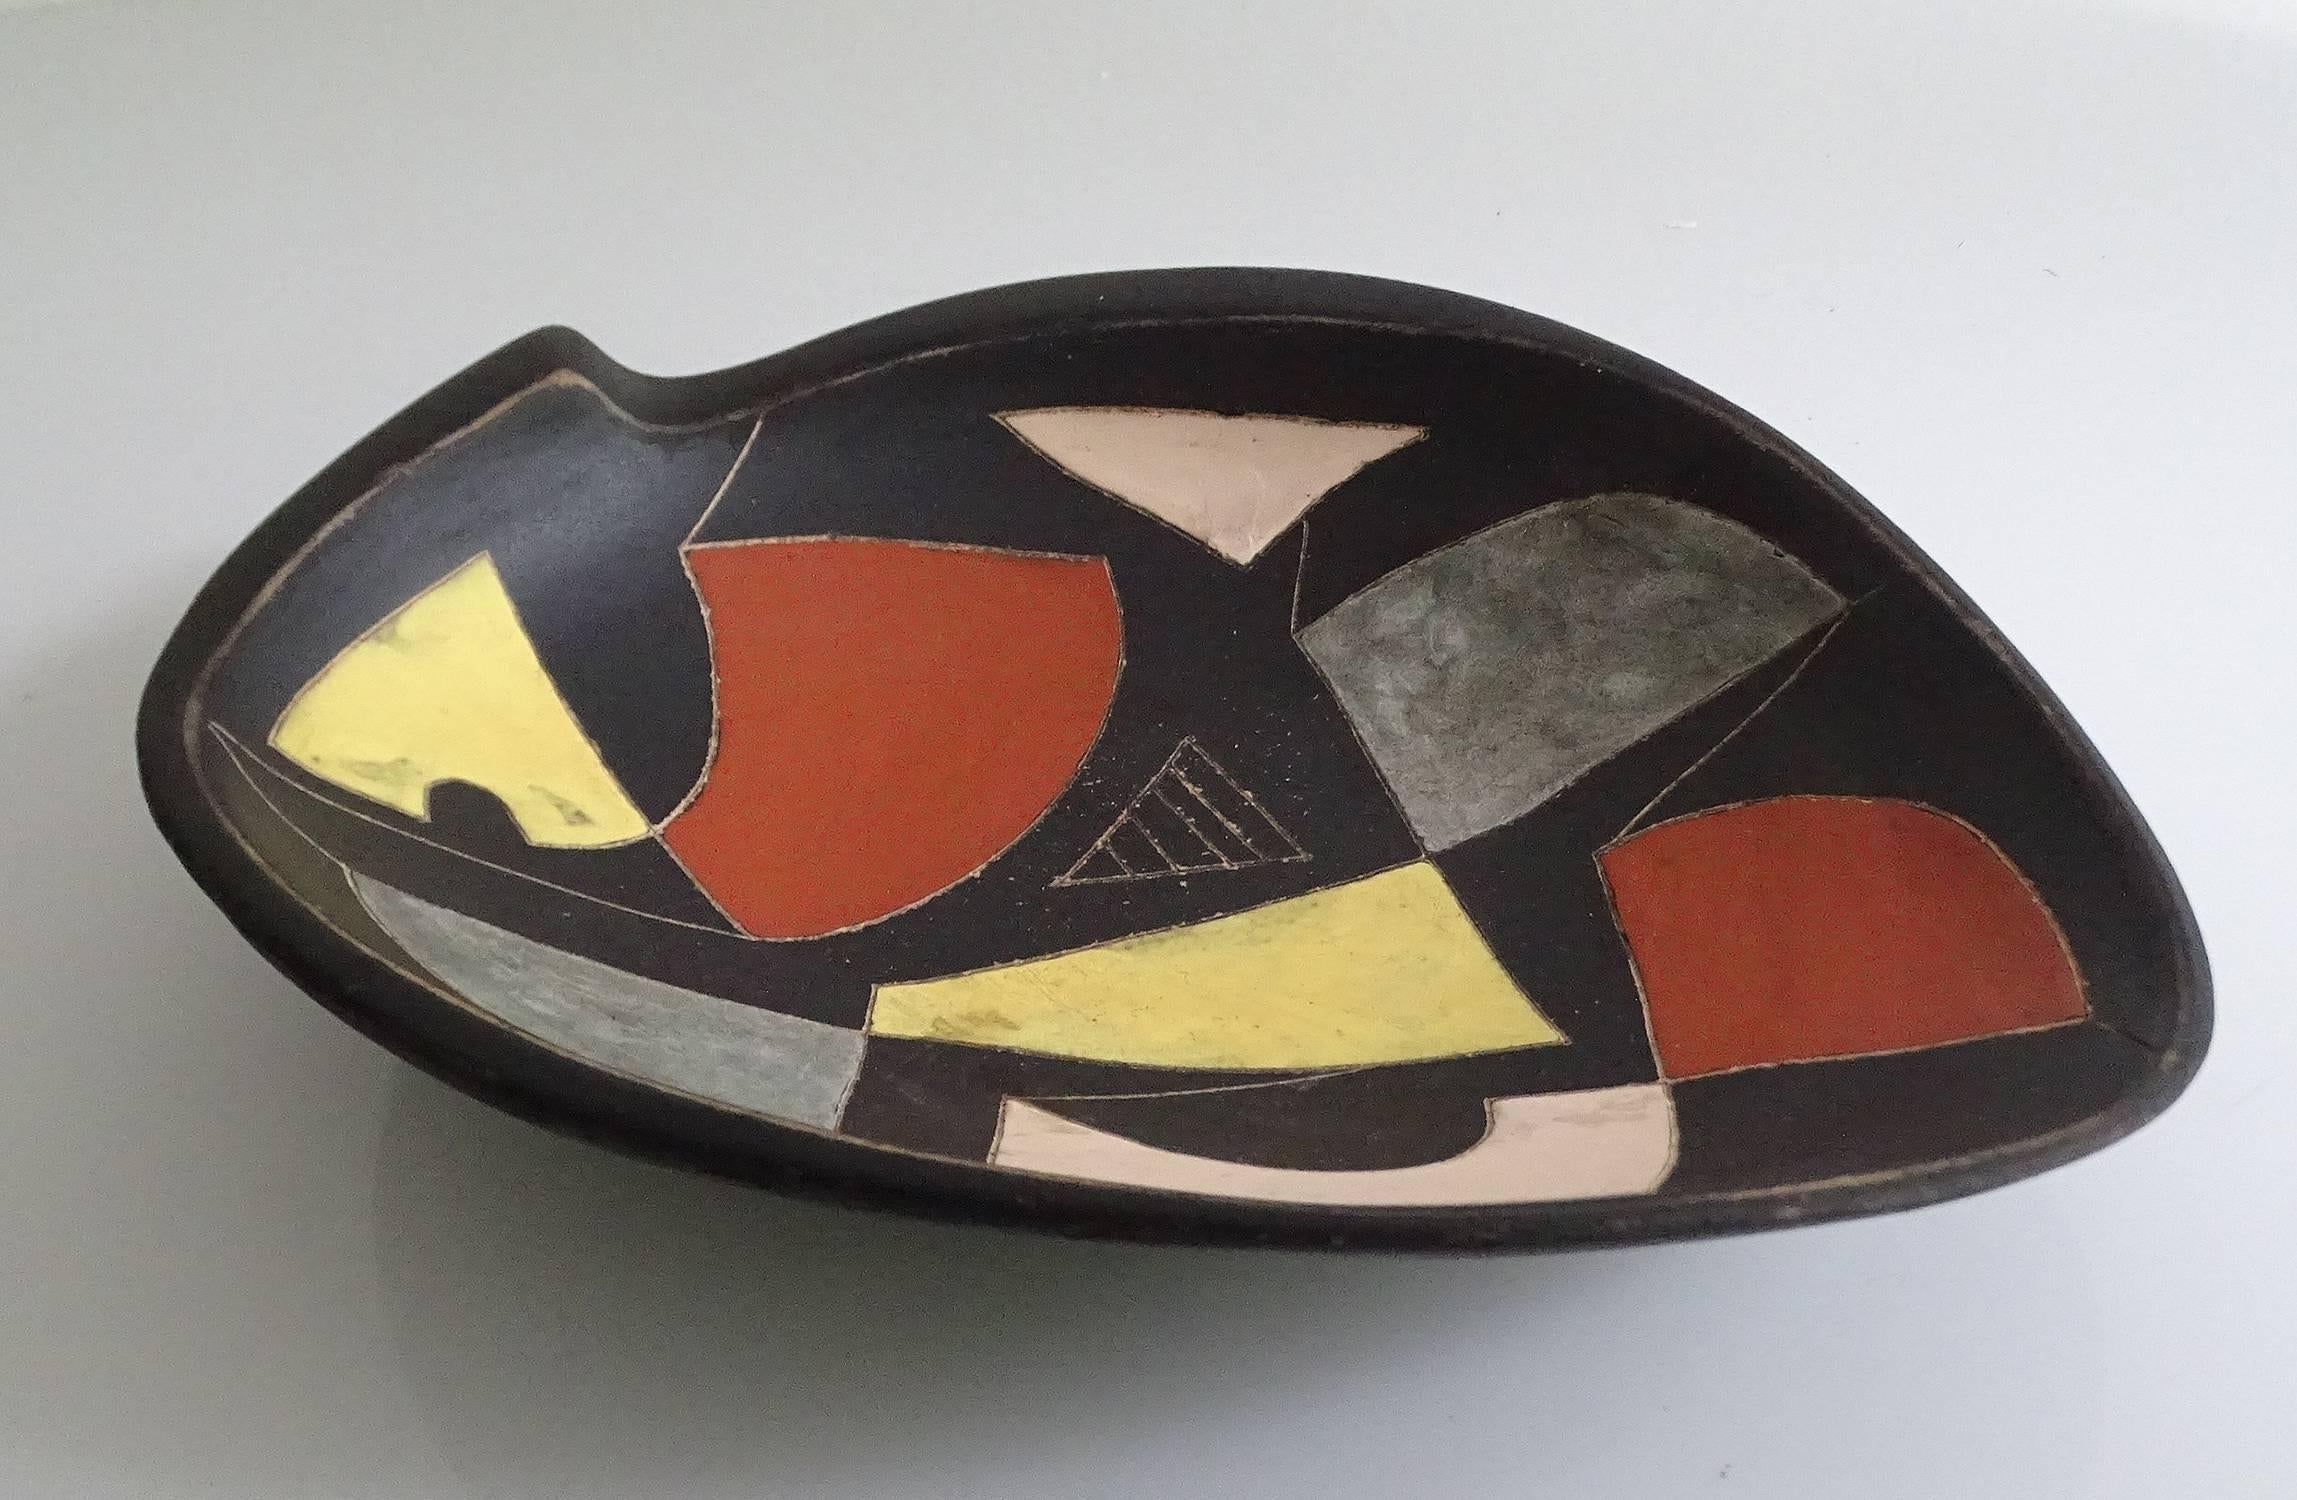 1950s Mid-Century hand-painted ceramic bowl with abstract patterns in the manner of Peter Orlando, the bowl itself has an overall organic leaf shape
2.76 in. H x 11.81 in. W x 9.25 in. D
7 cm H x 30 cm W x 24 cm D